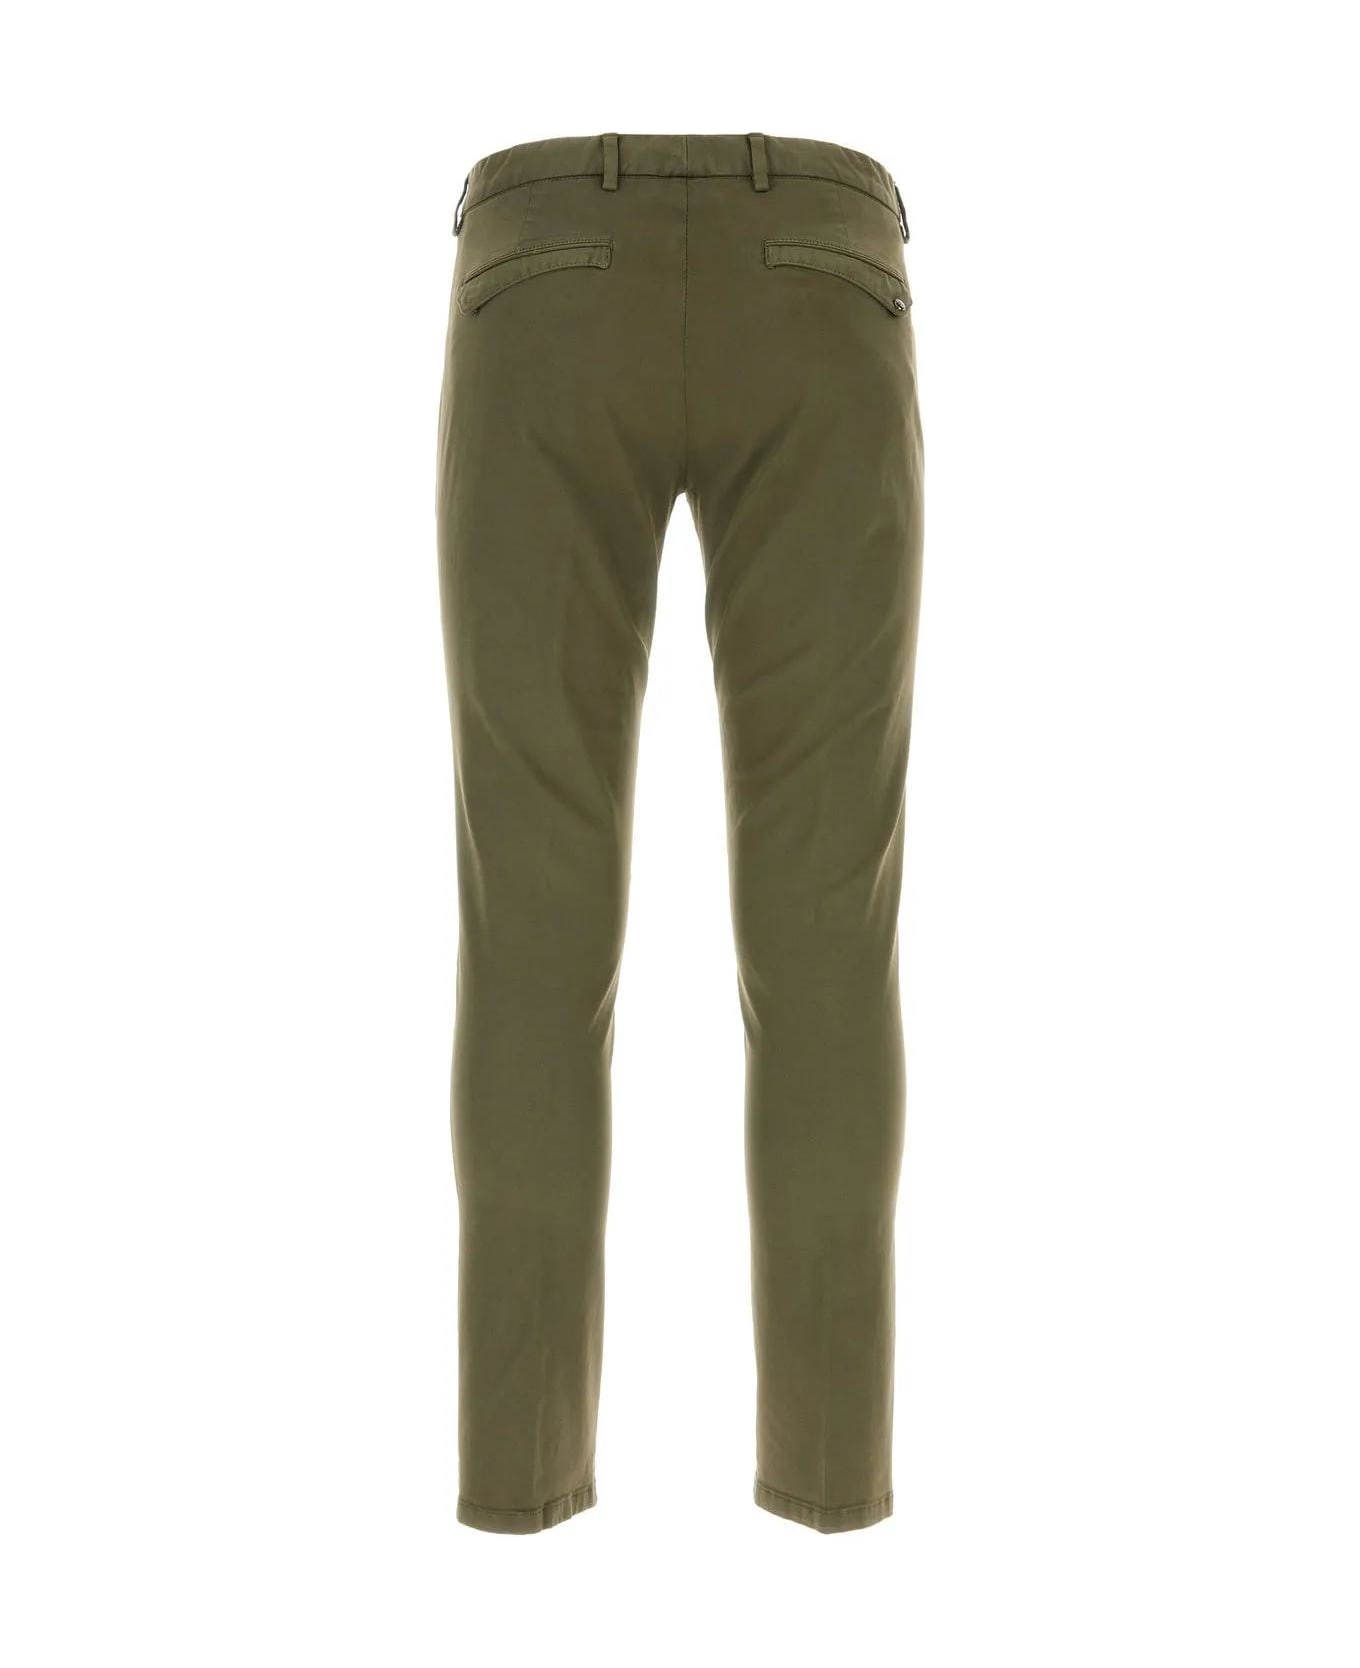 PT Torino Olive Green Stretch Cotton Pant ボトムス